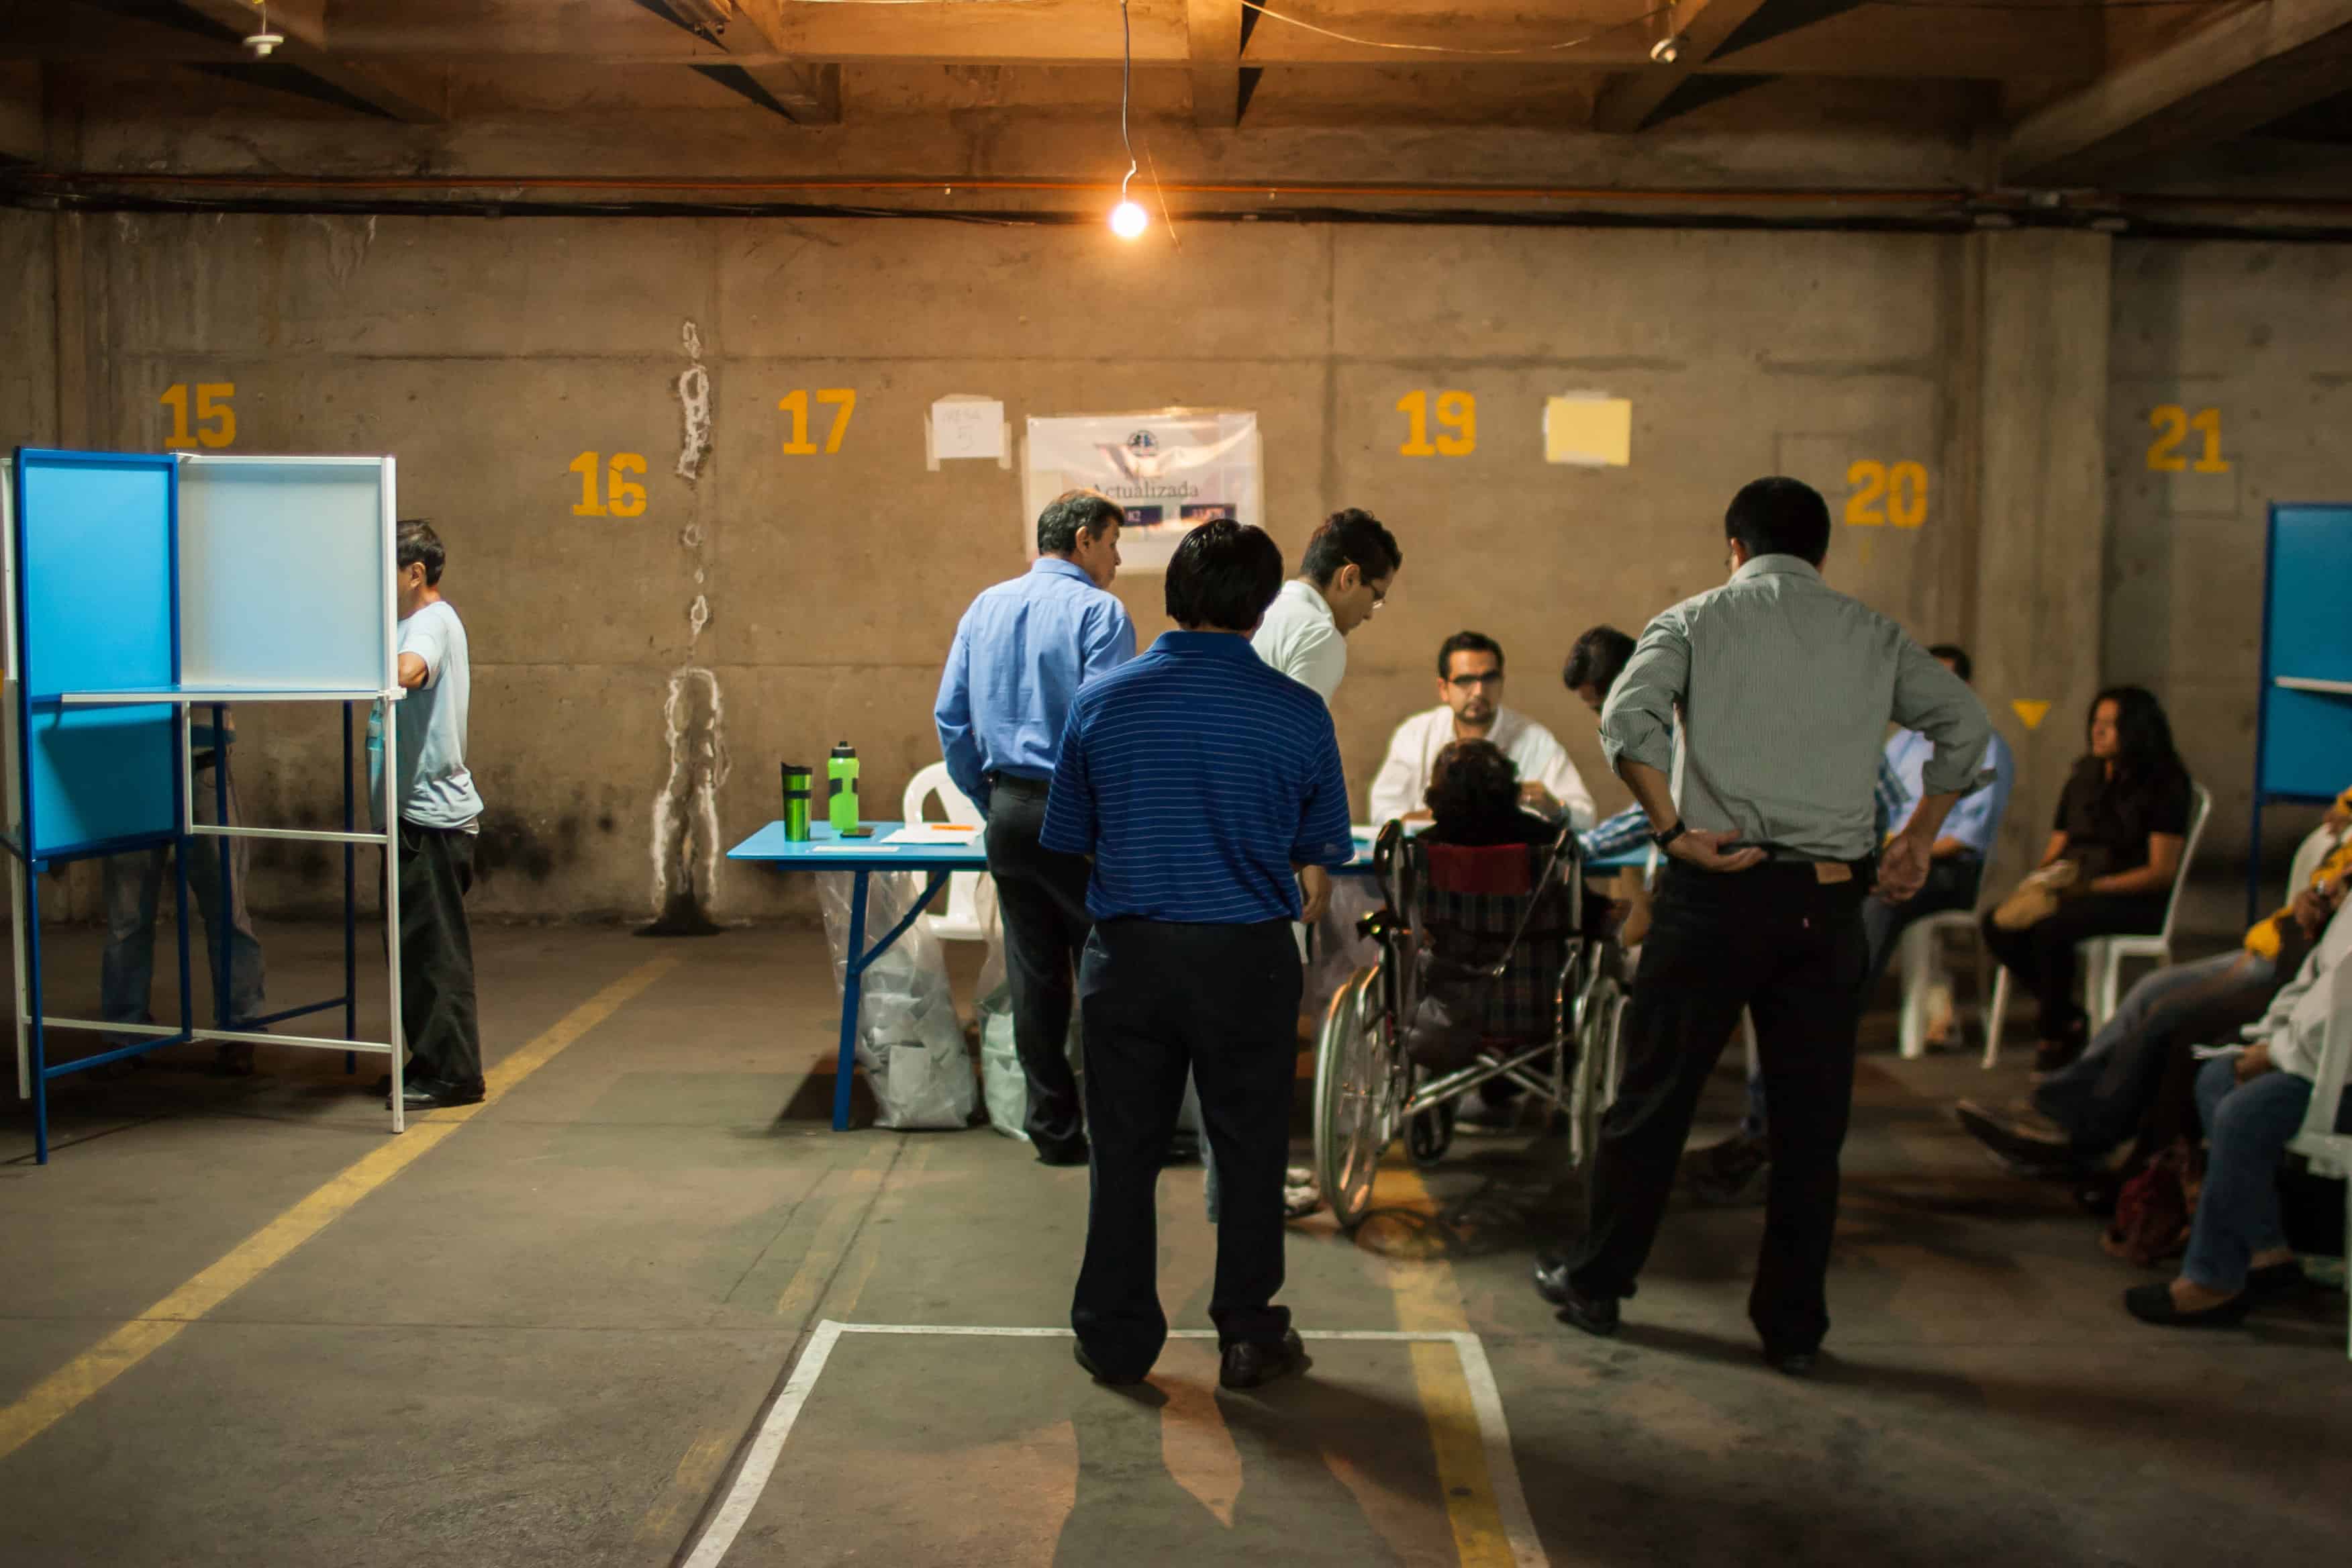 Disillusioned voters cast ballots Sunday, Sept. 6, 2015 in Guatemala in order to have the right to protest later.